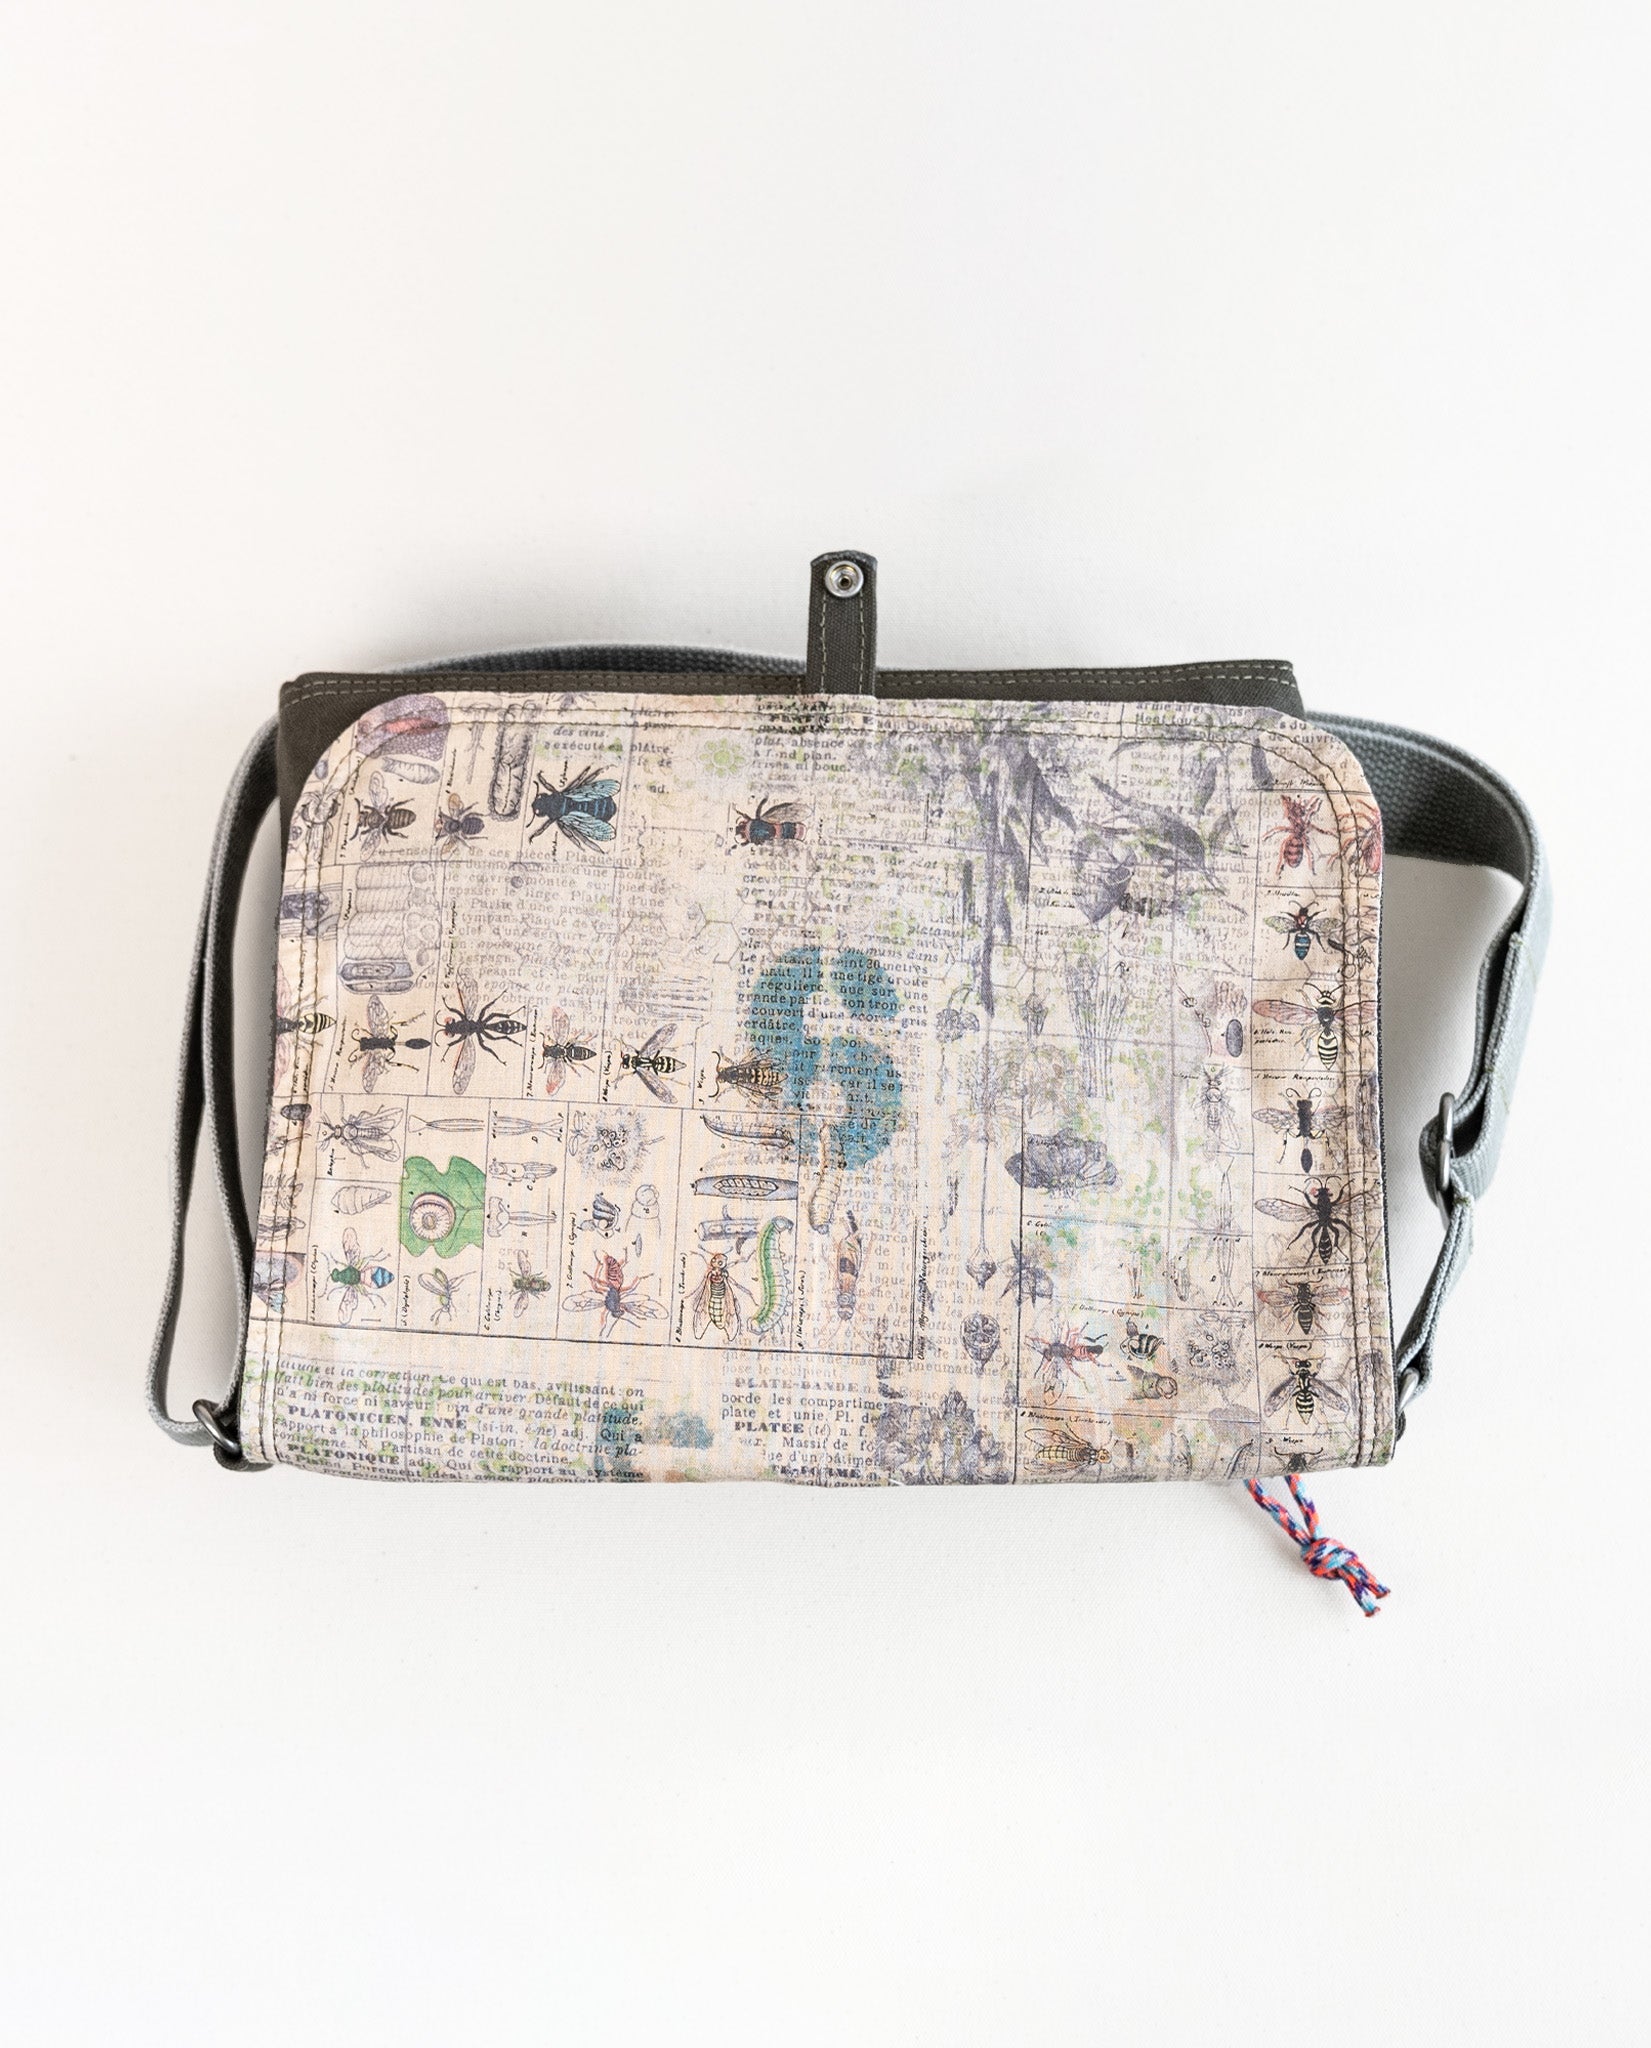 Inside of flap showing entomology print lining fabric of Dock 5’s Chickadee Canvas Messenger Bag in olive featuring art from owner Natalija Walbridge